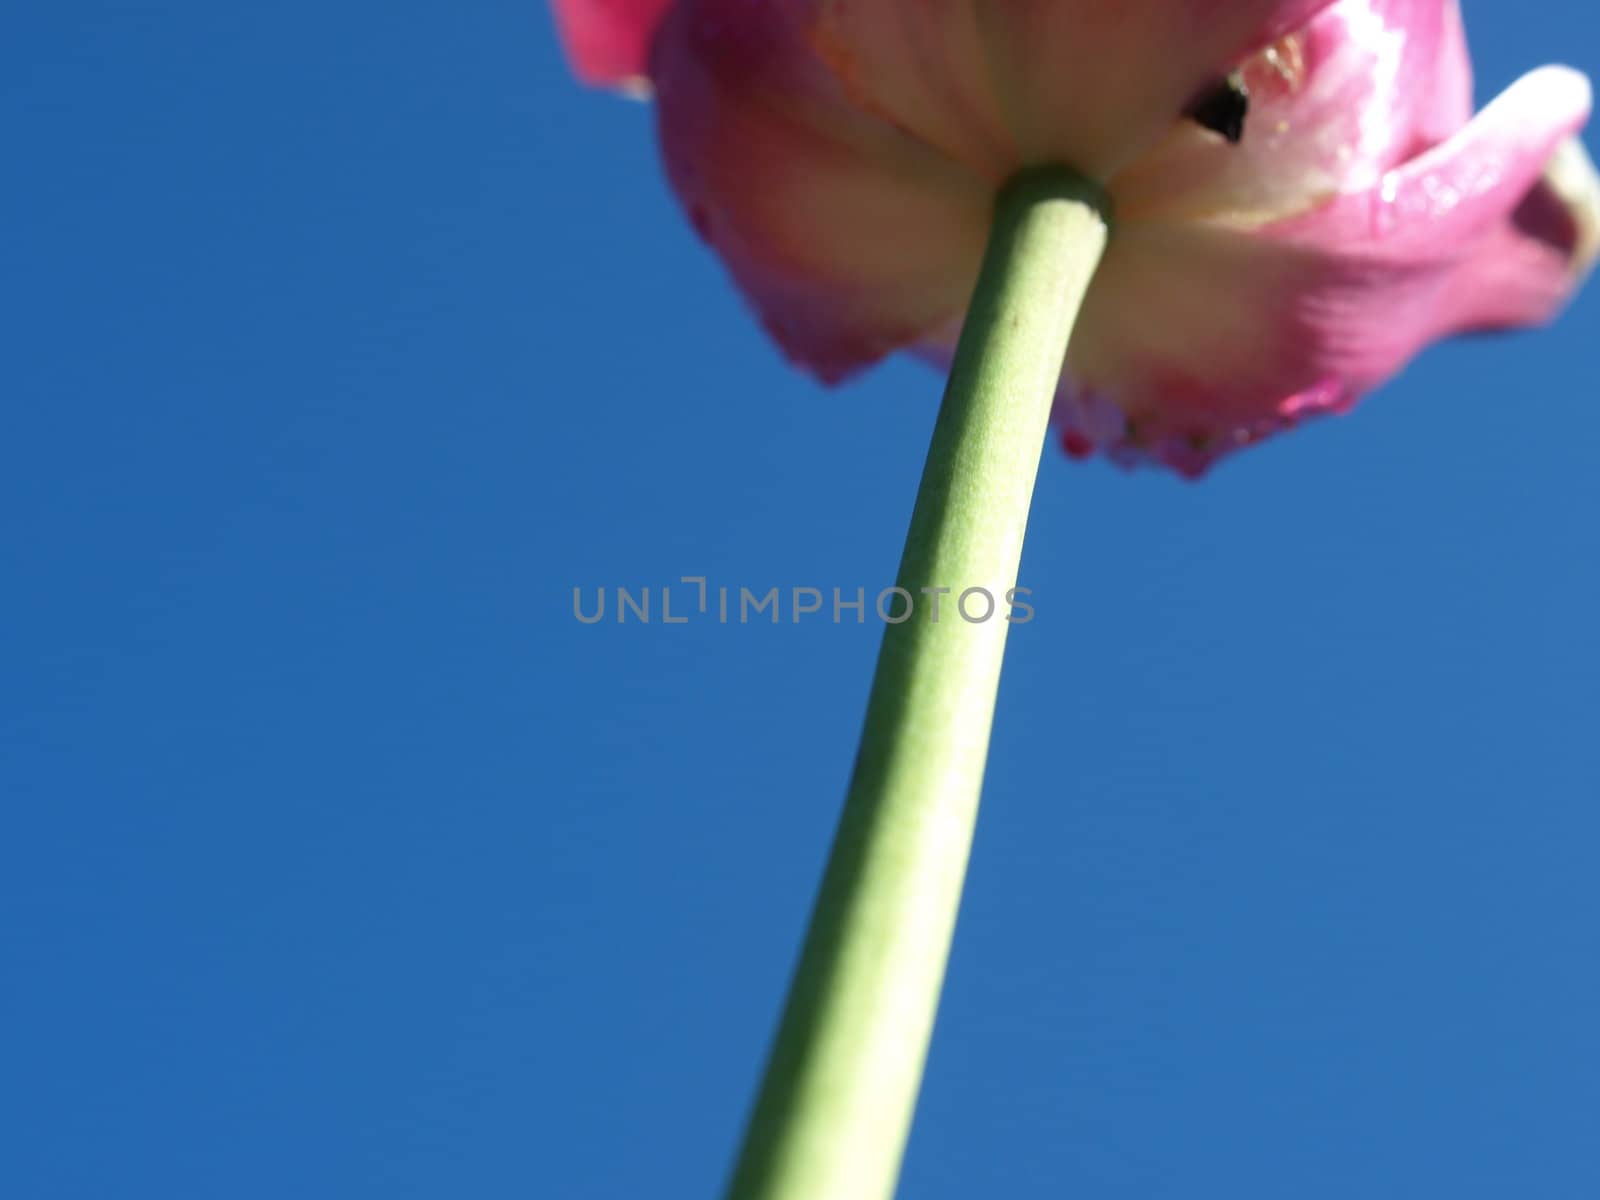 View of a purple tulip from the underside